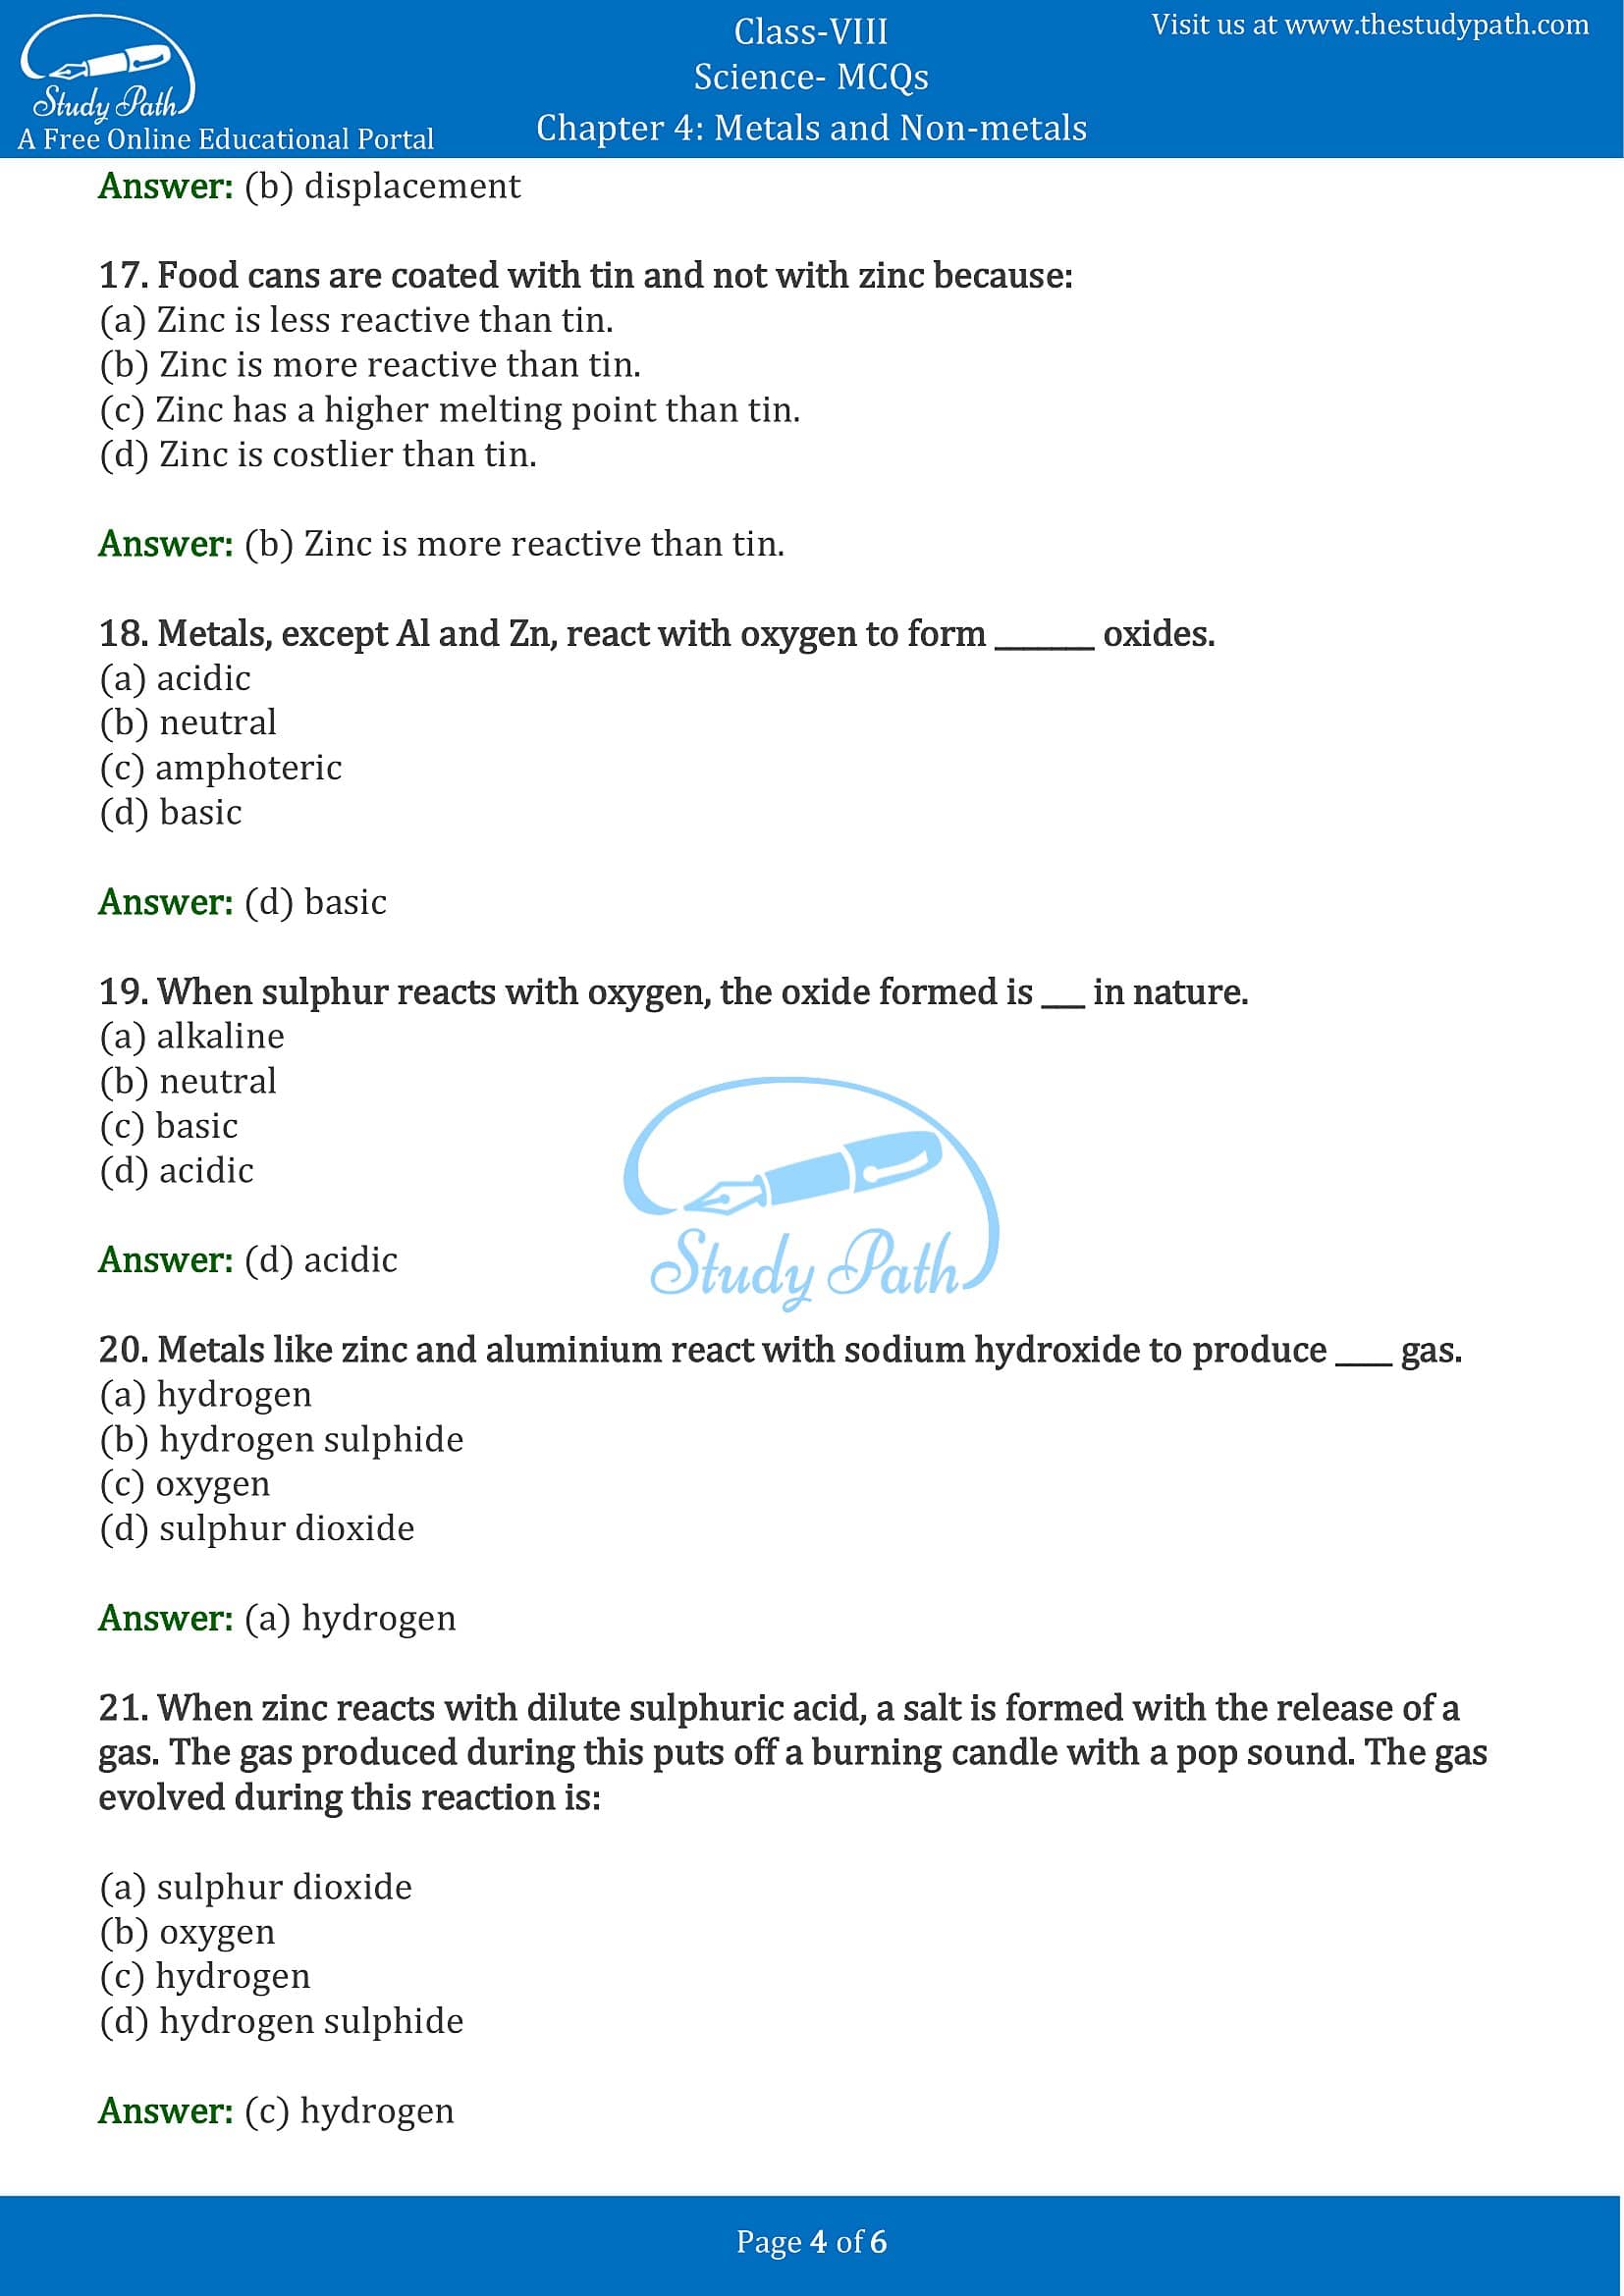 MCQ Questions for Class 8 Science Chapter 4 Metals and Non-metals with Answers PDF -4